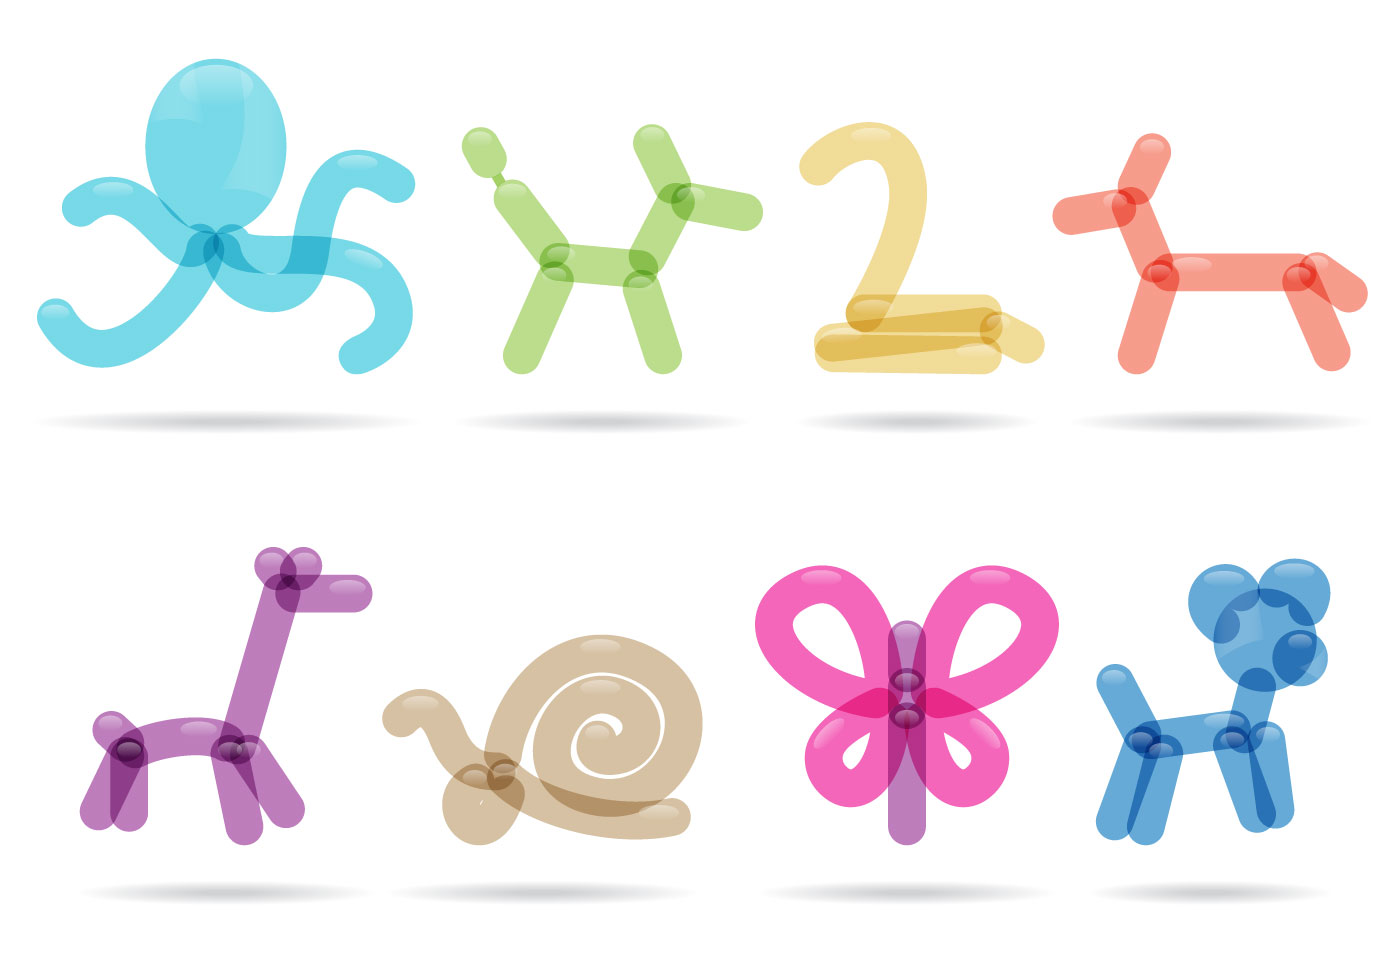 basic balloon animals step by step - Clip Art Library